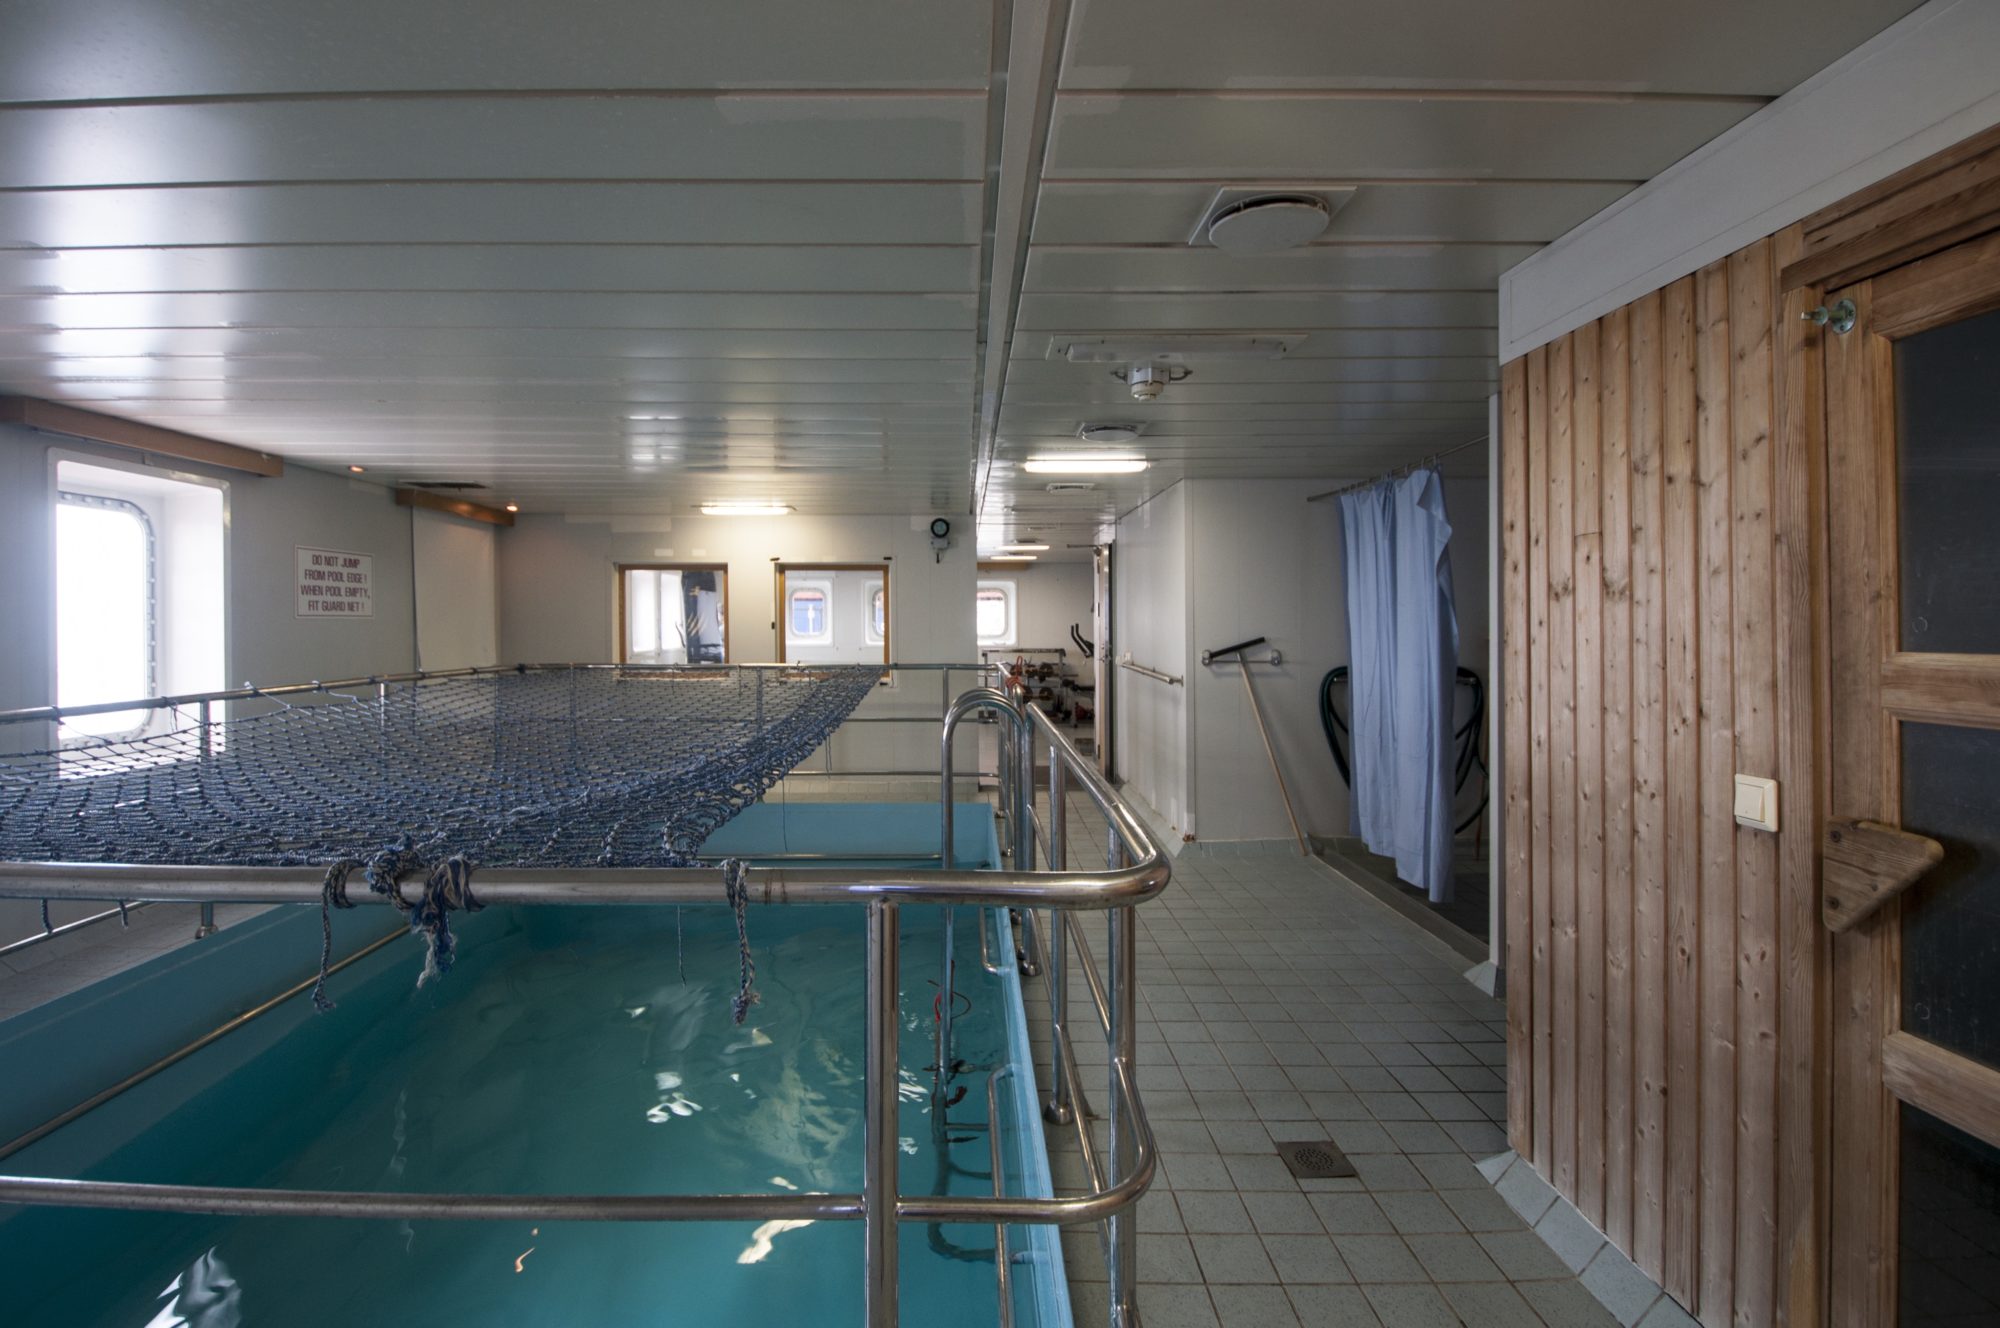 indoor pool of cargo ship pictured, blue netted covering a quarter of the way open